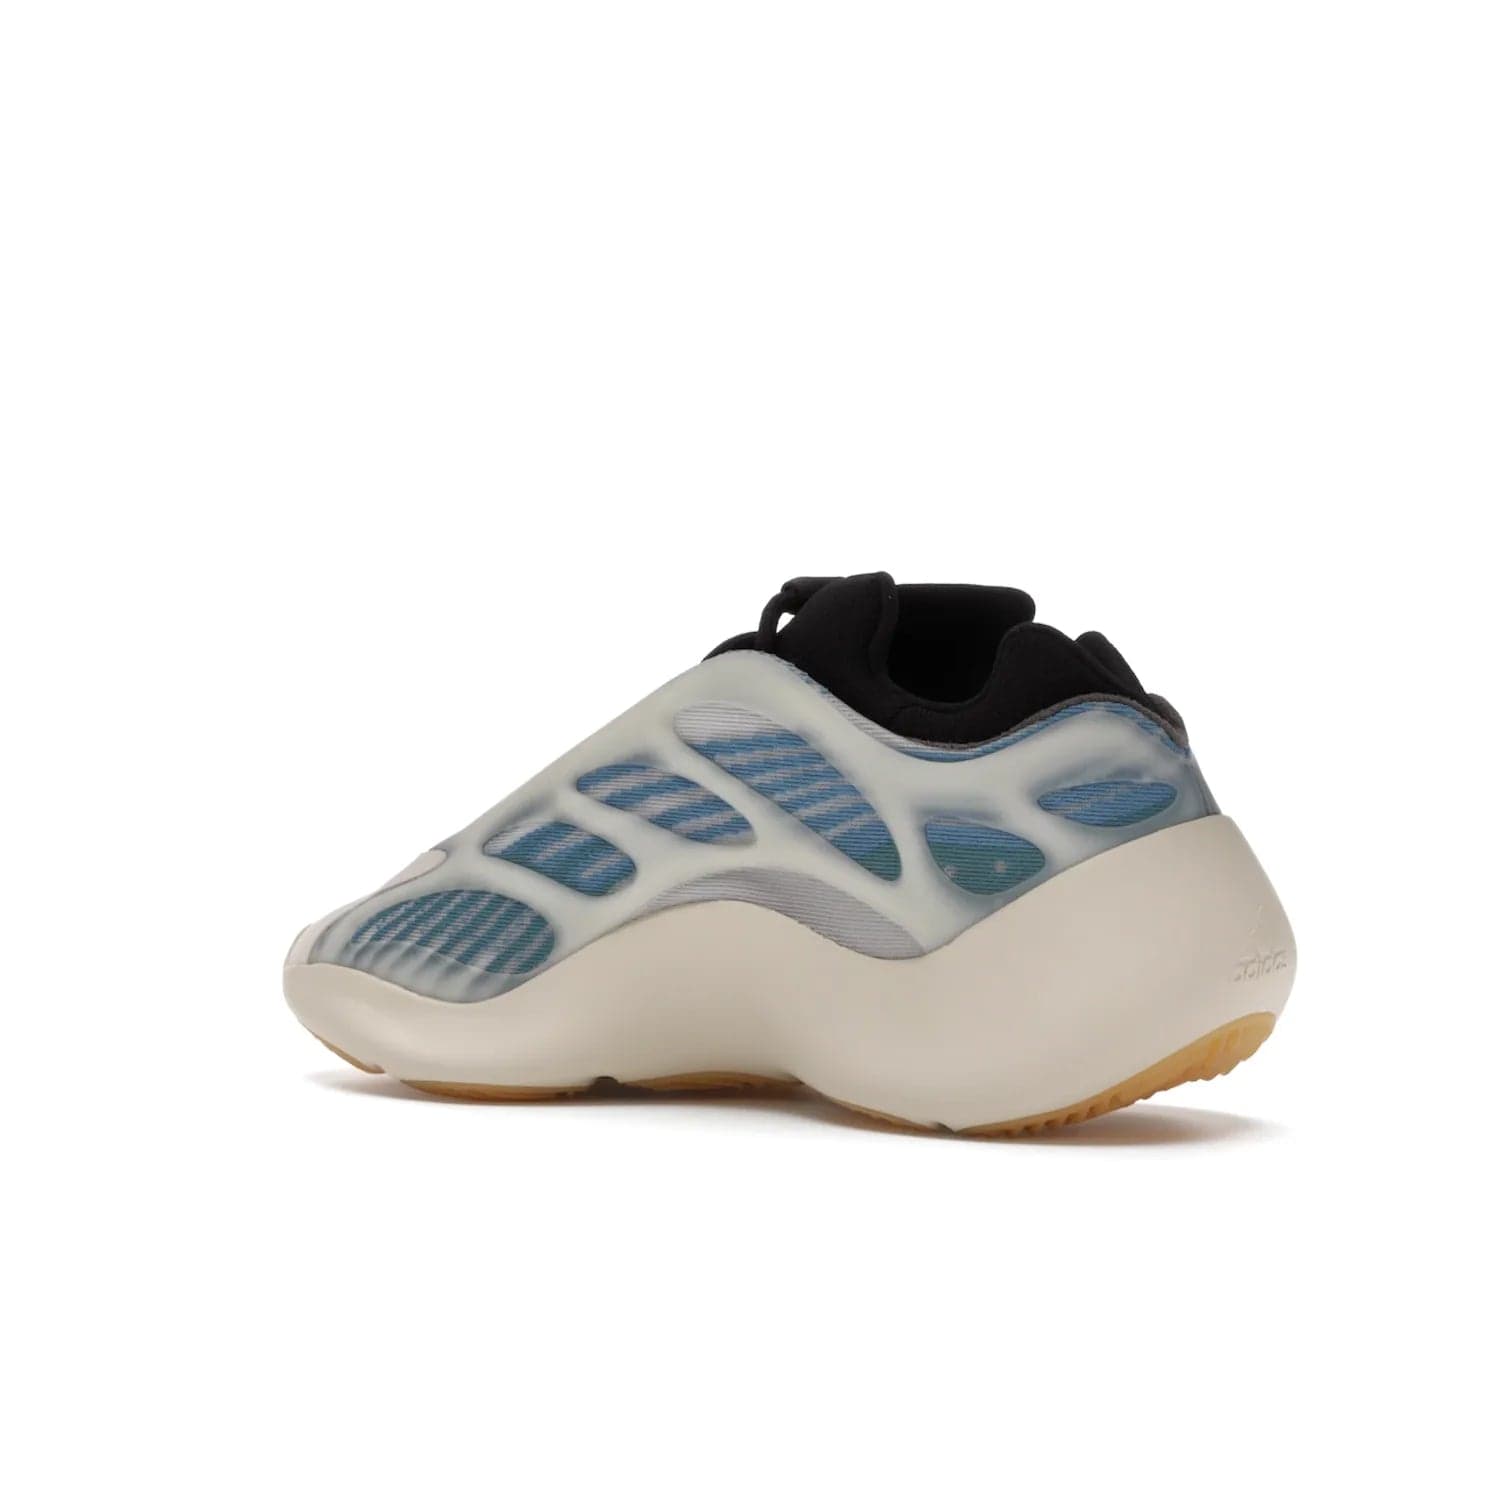 adidas Yeezy 700 V3 Kyanite - Image 23 - Only at www.BallersClubKickz.com - The adidas Yeezy 700 V3 Kyanite offers a layered design featuring a glow-in-the-dark TPU cage and a tonal cream-colored EVA foam midsole. With its herringbone-patterned outsole, the style and comfort of the sneaker will accompany you anywhere. Released in March 2021, it's a great addition to any sneaker wardrobe.